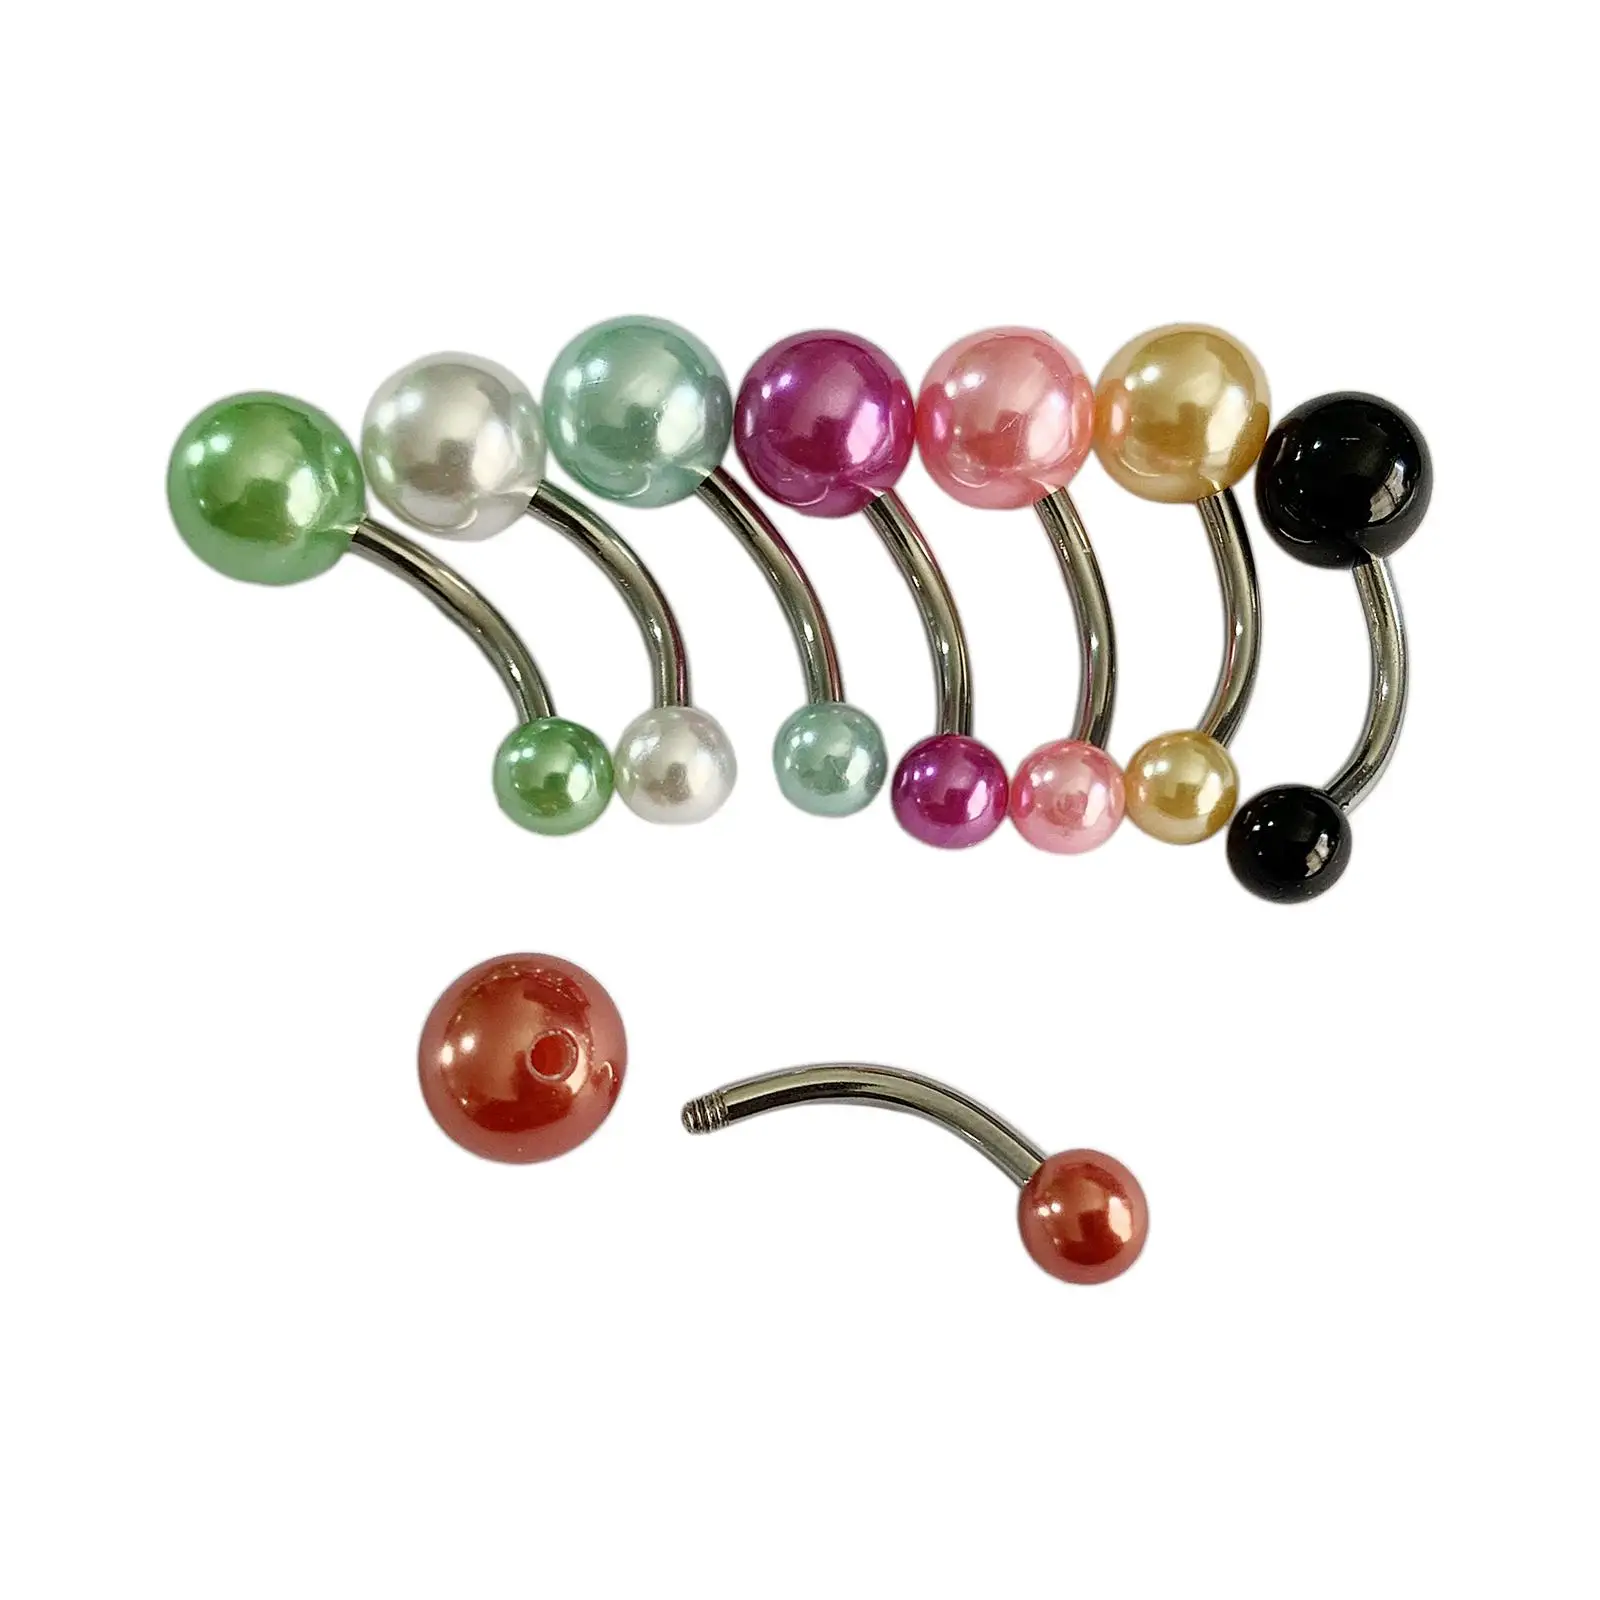 8x Belly Button Rings Easy to Wear Comfortable Hip Rock 10mm 1.6mm Fashion Acrylic Body Piercing Jewelry for Women Men